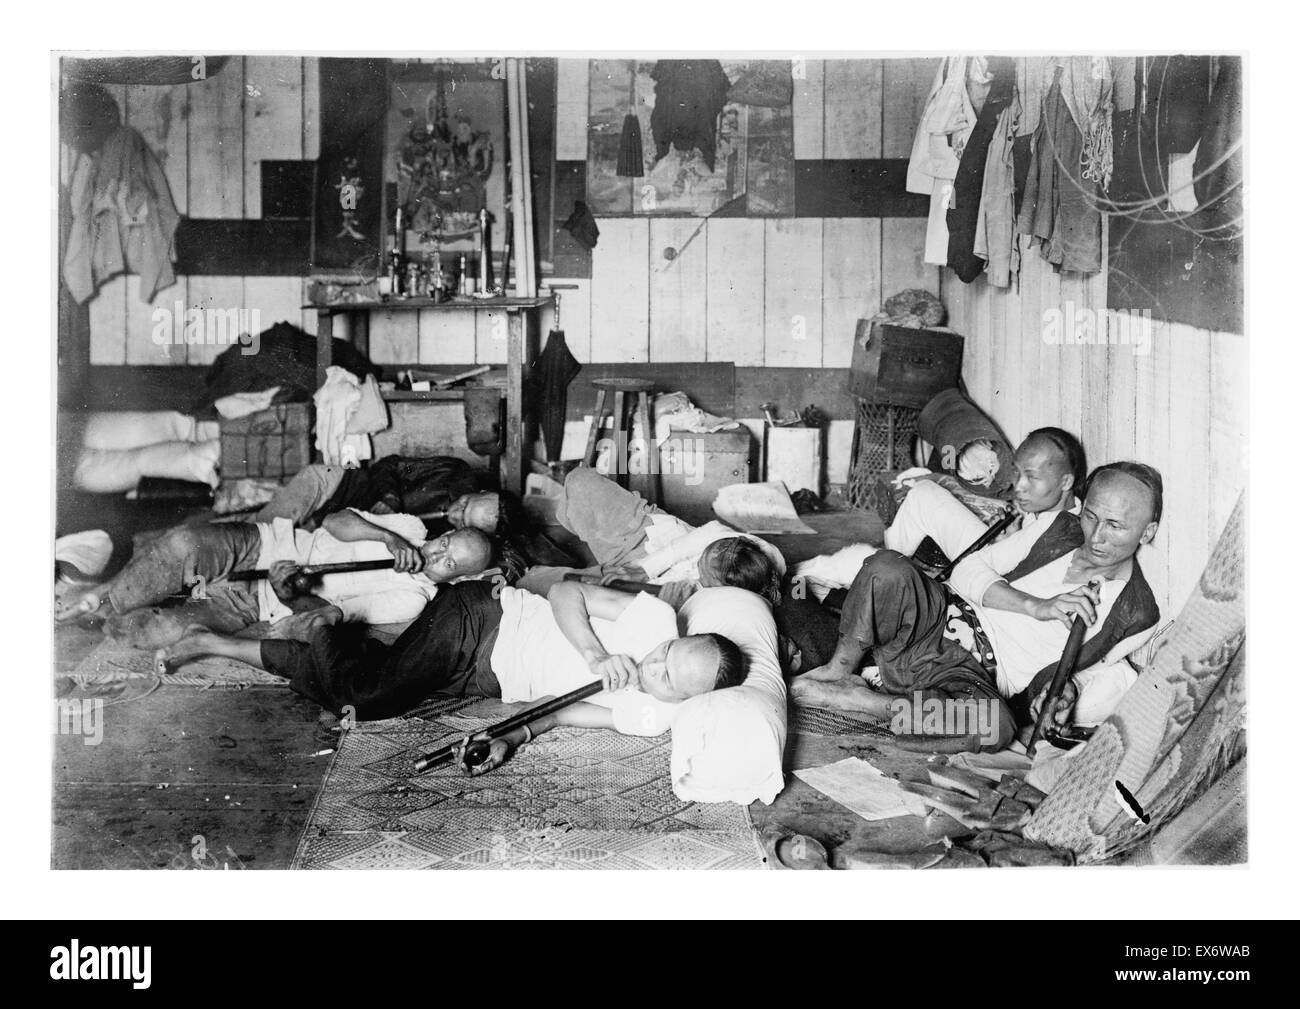 Opium den on Malinta Street, Manila, Philippine Islands. Photo shows an interior view of an opium den with several men reclining, smoking long opium pipes. . 1924. Stock Photo